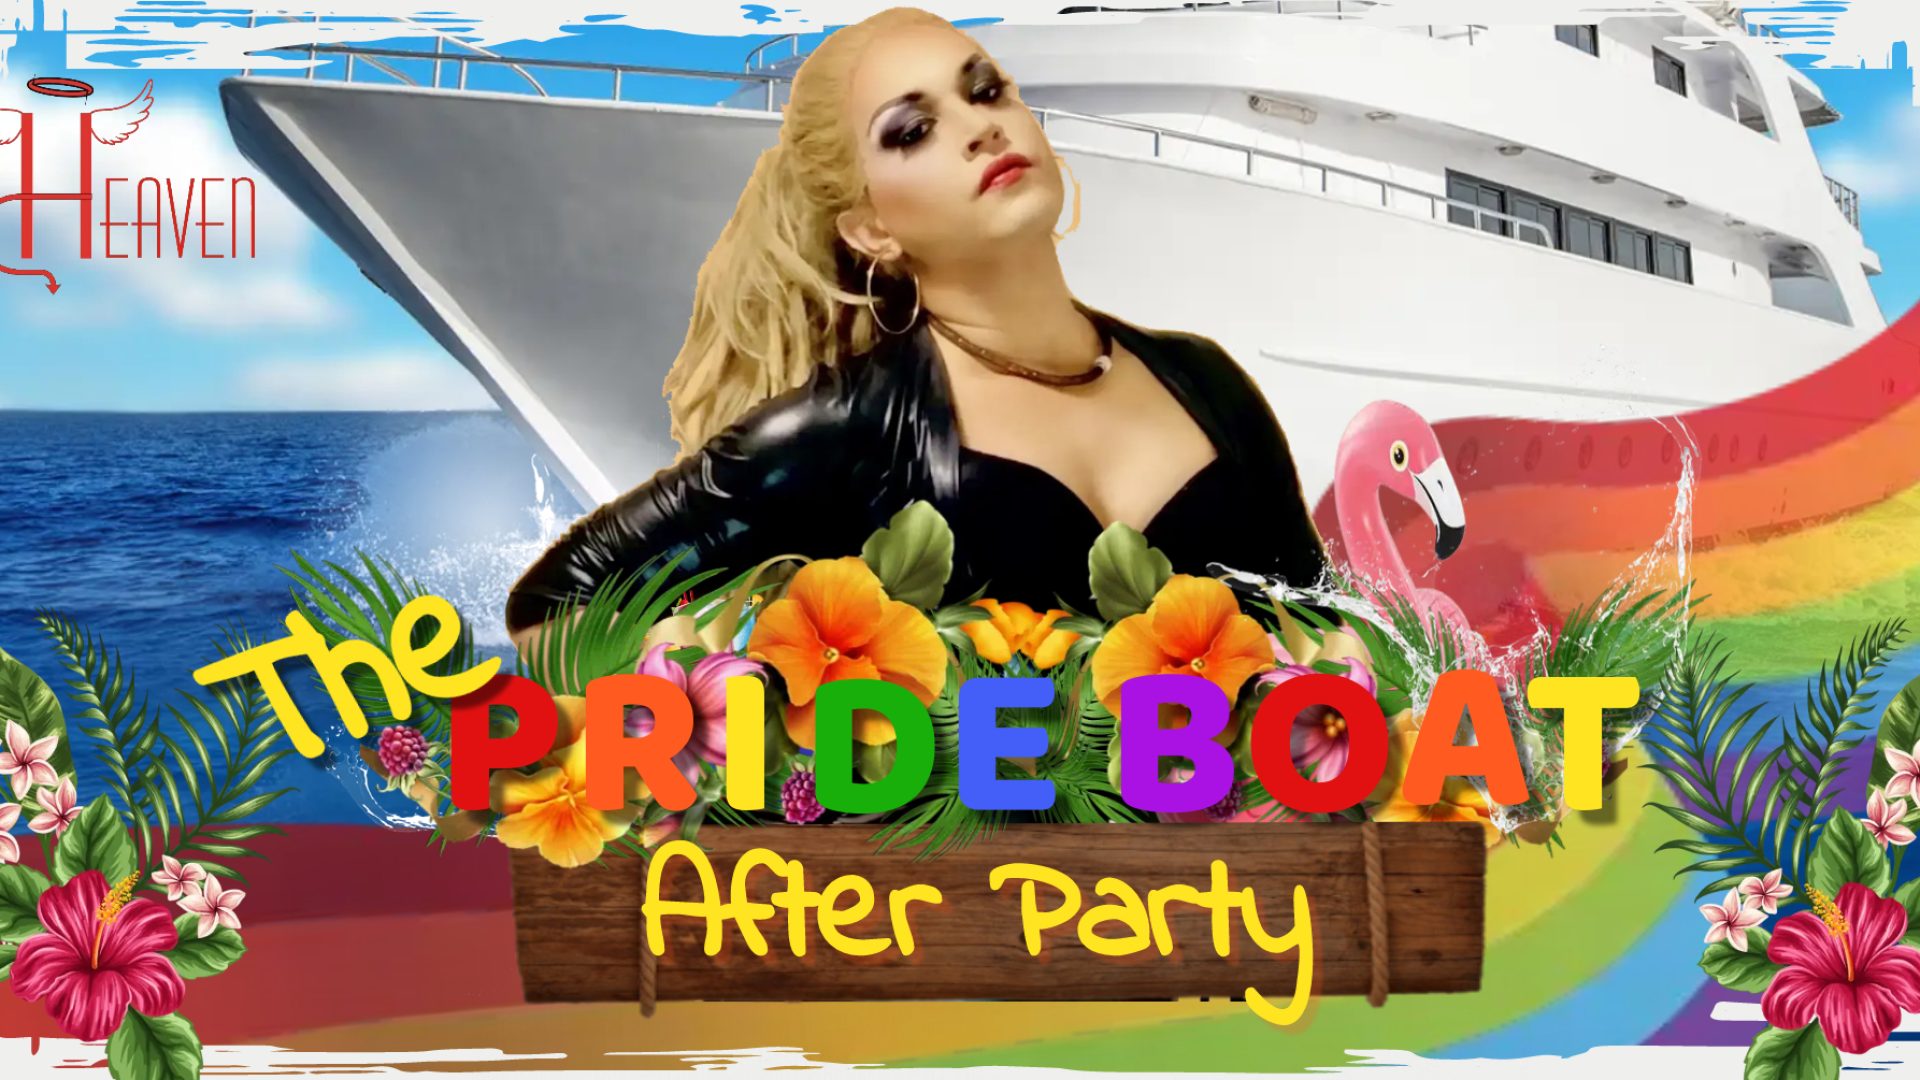 The Big Pride Boat Afterparty